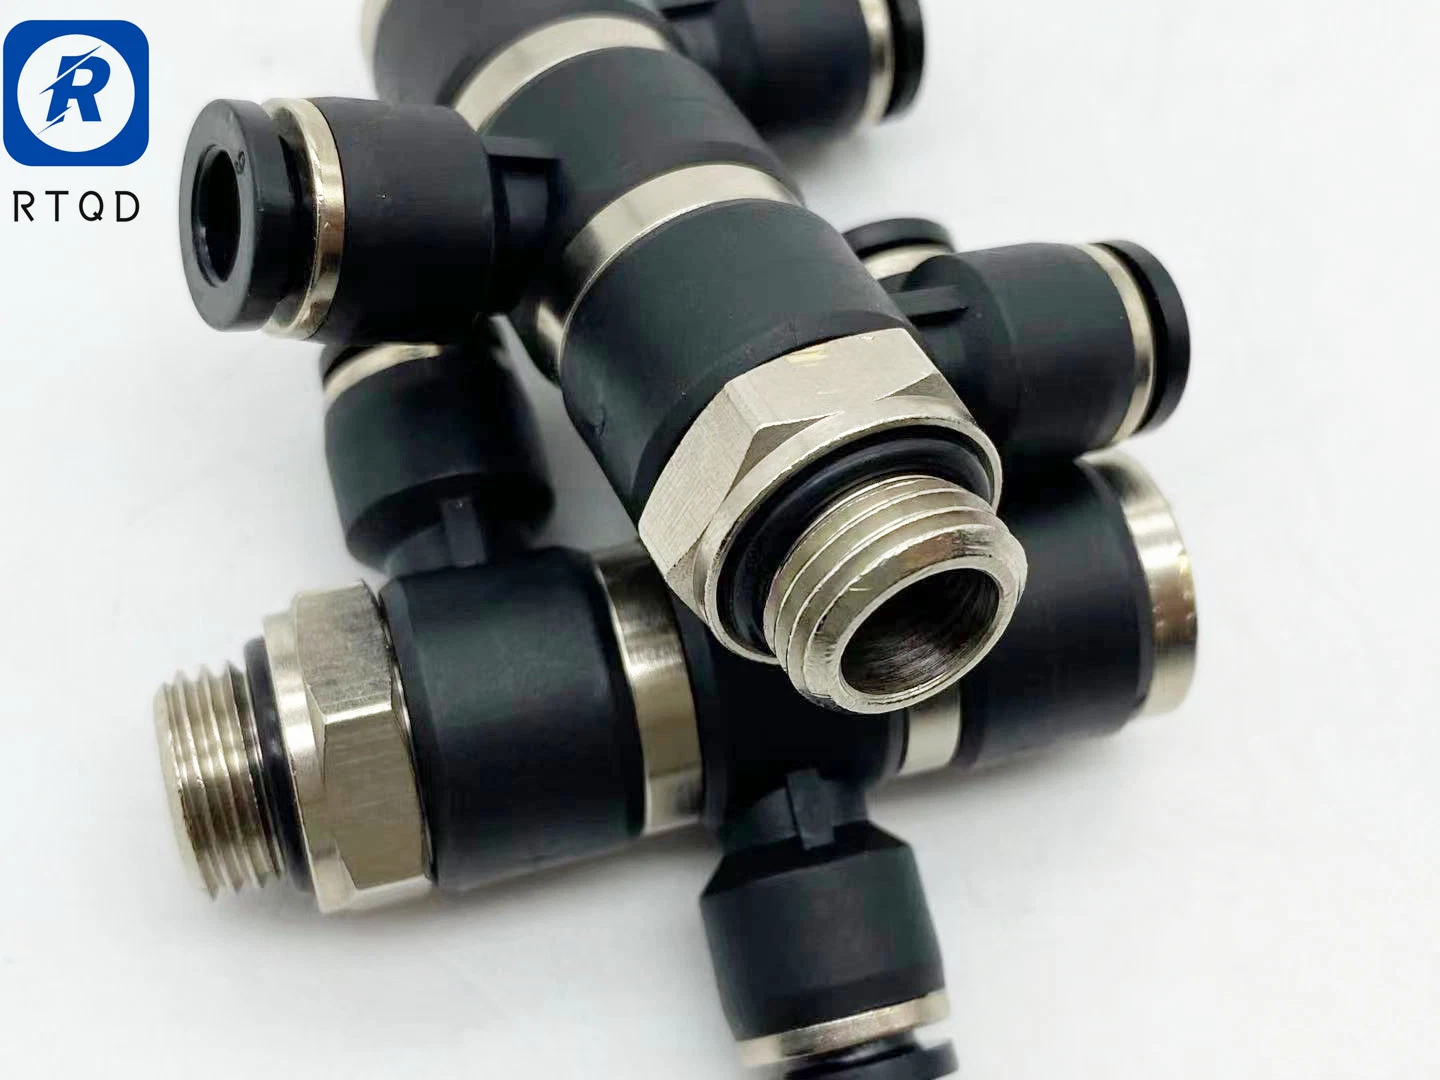 Pneumatic Double Male Elbow Connector Air Pipe Fitting Pneumatic Components Triple Universal Male Elbow Joint Connector Kq2vt Kq2vd Series